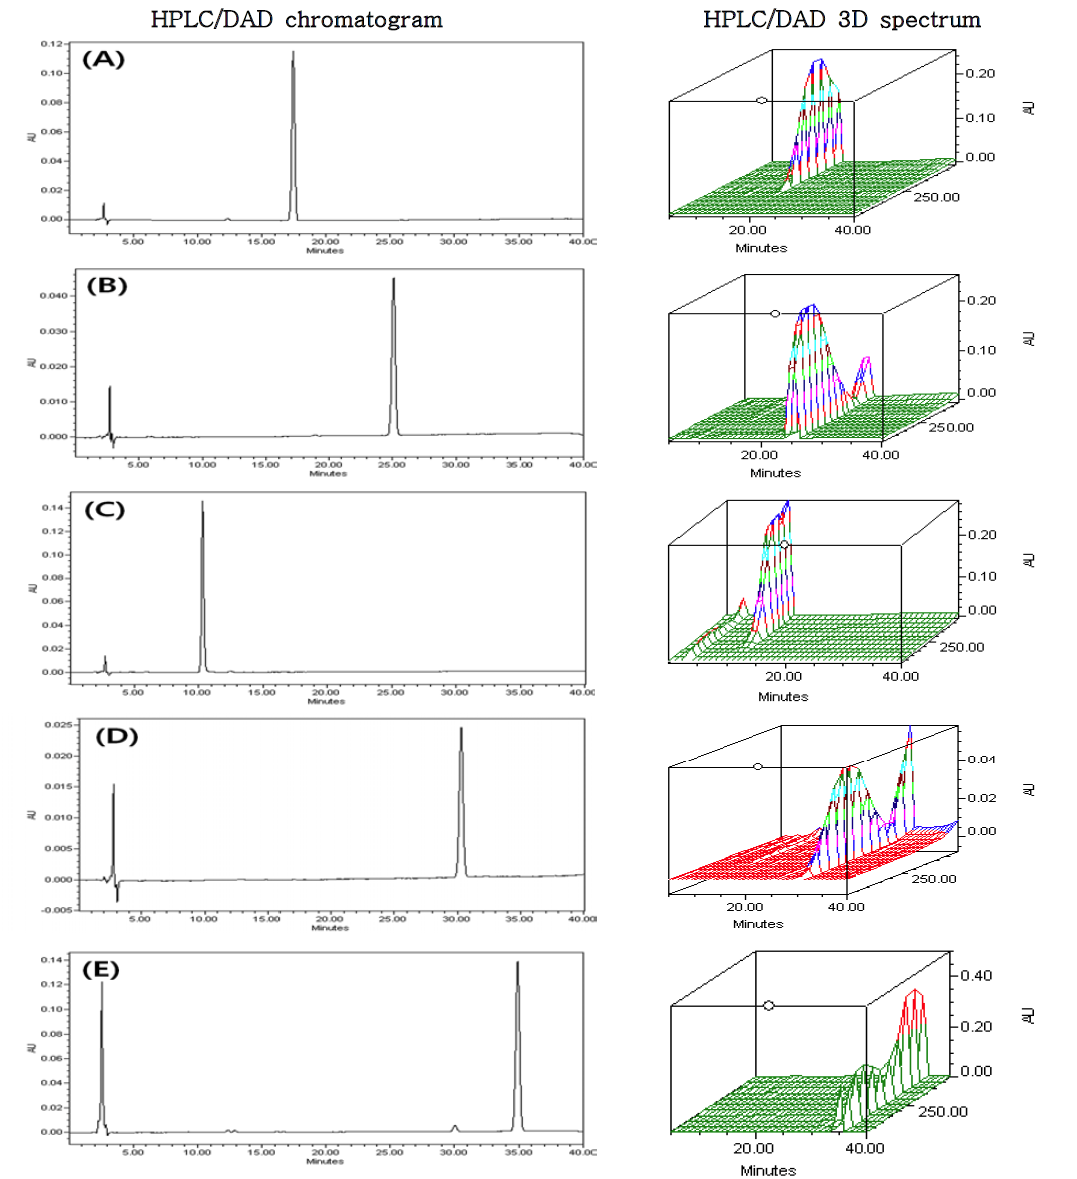 HPLC/DAD chromatograms and spectrums of (A) atractylenolide I, (B) atractylenolide II, (C) atractylenolide III, (D) eudesma-4(14),7(11)-dien-8-one and (E) atractylodin